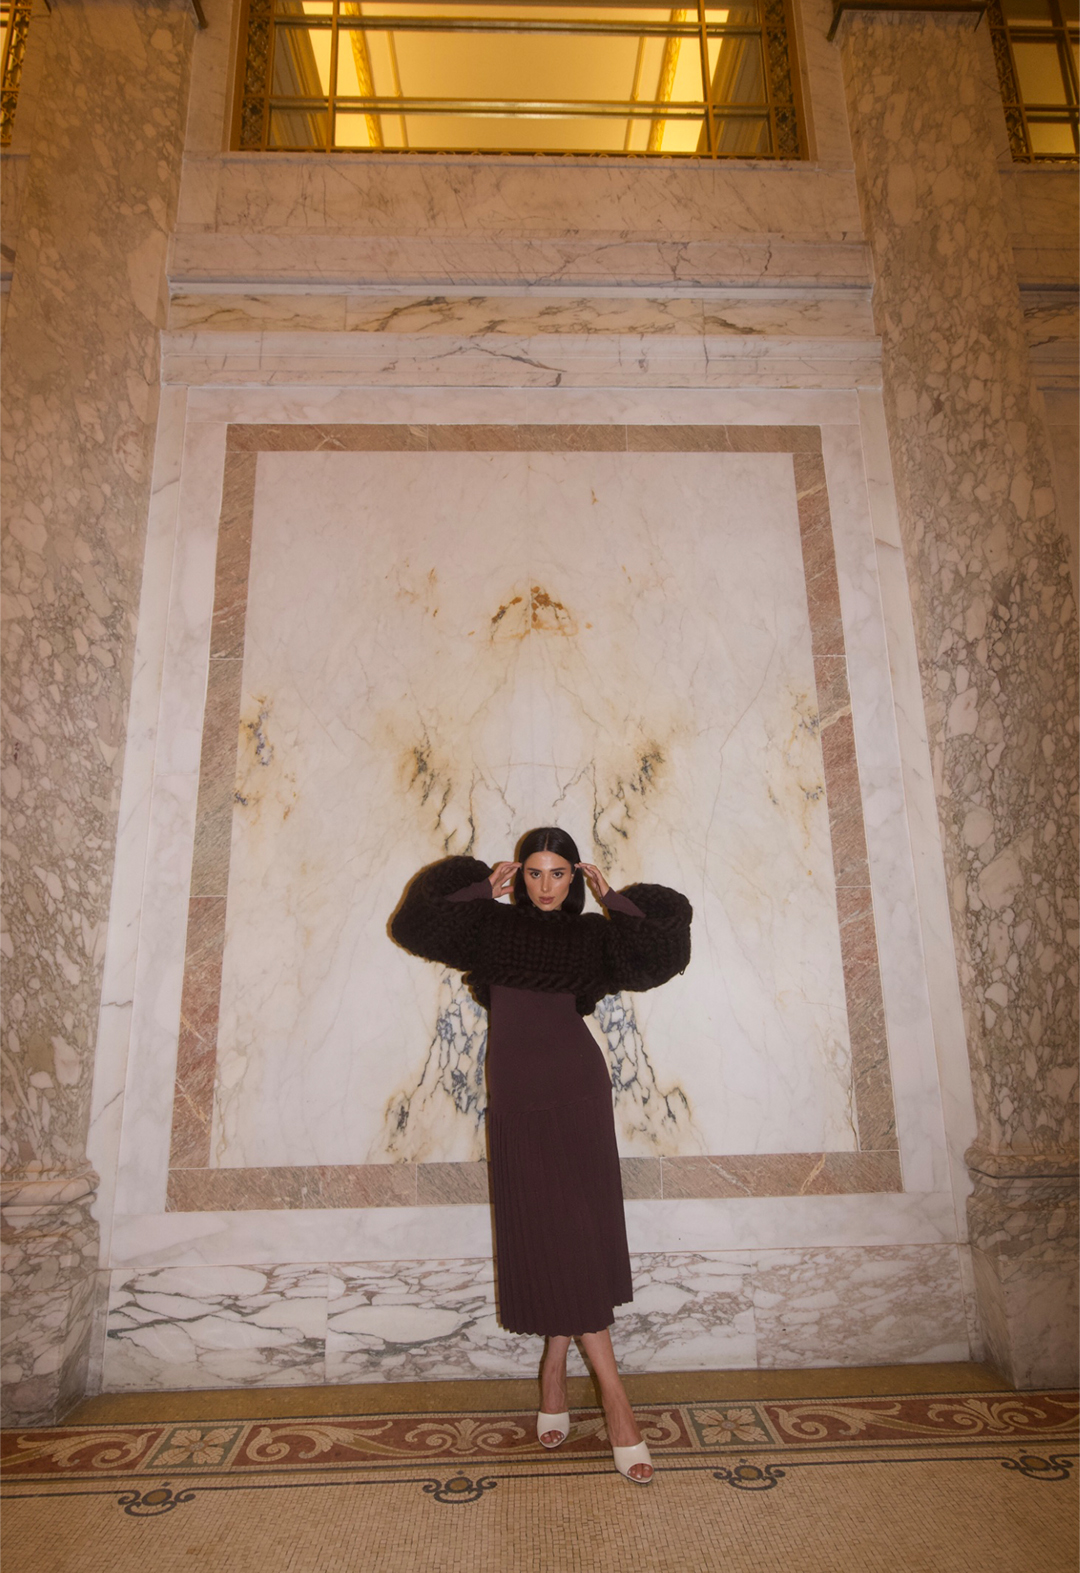 A model standing in front of a white and brown marble wall, wearing a brown dress layered with chunky hand knitted shrug.